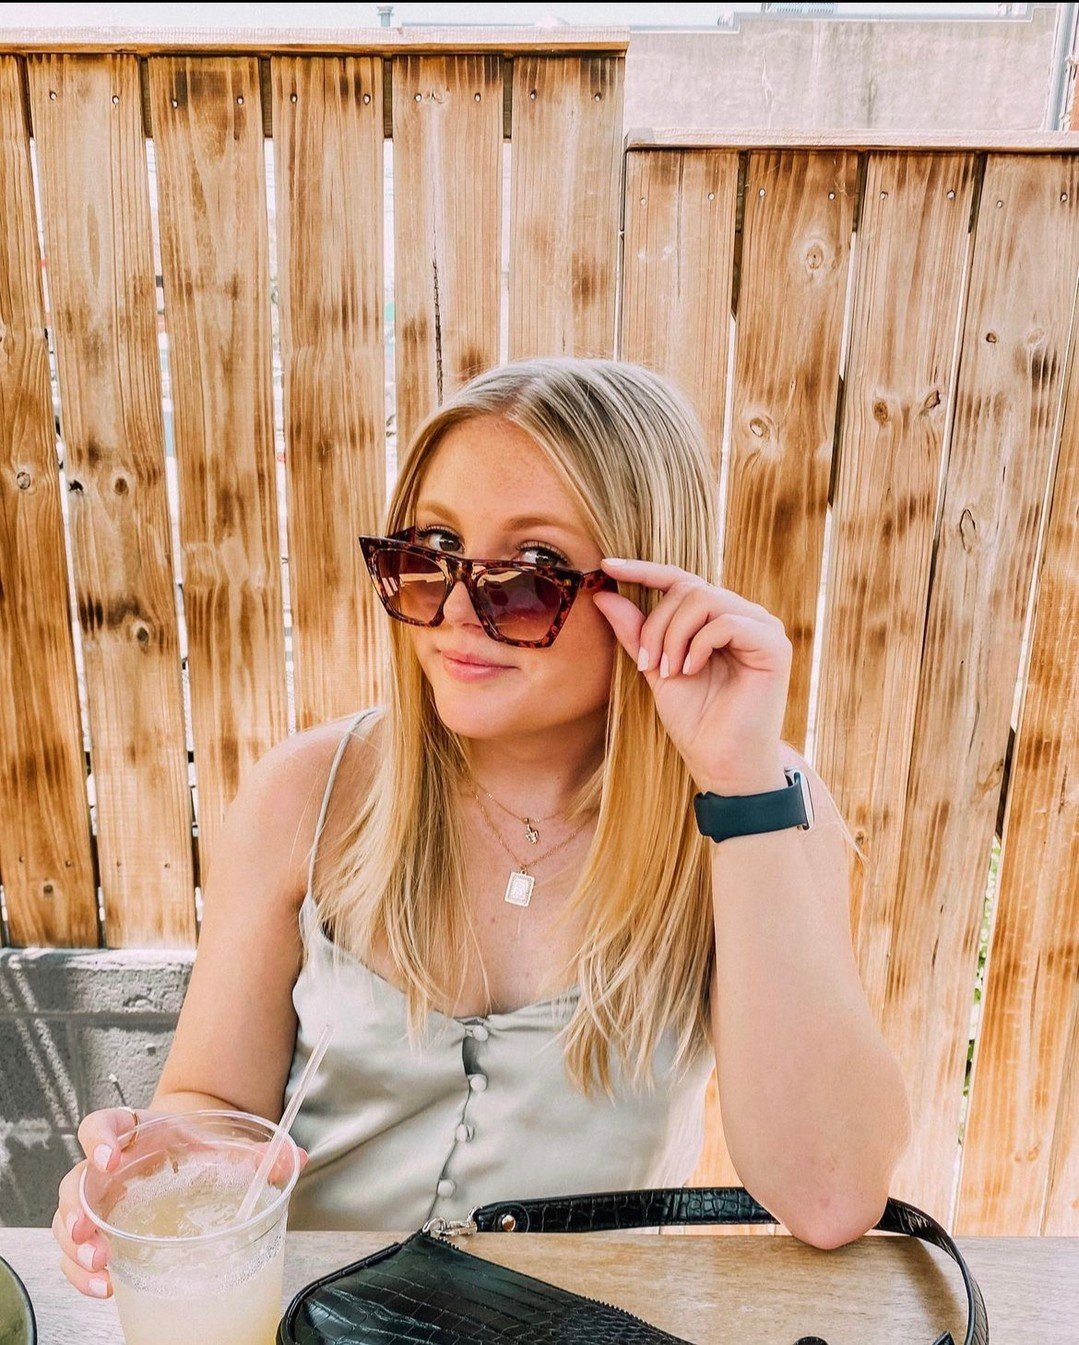 Sunglasses and cocktails: the ultimate accessory combo! 🍹✨

Don't forget, we've got bottomless brunch every Saturday and Sunday!

#brunchinbaltimore #baltimoreresturants #drinkspecials #outdoorseating #springinbaltimore #bottomlessbrunch